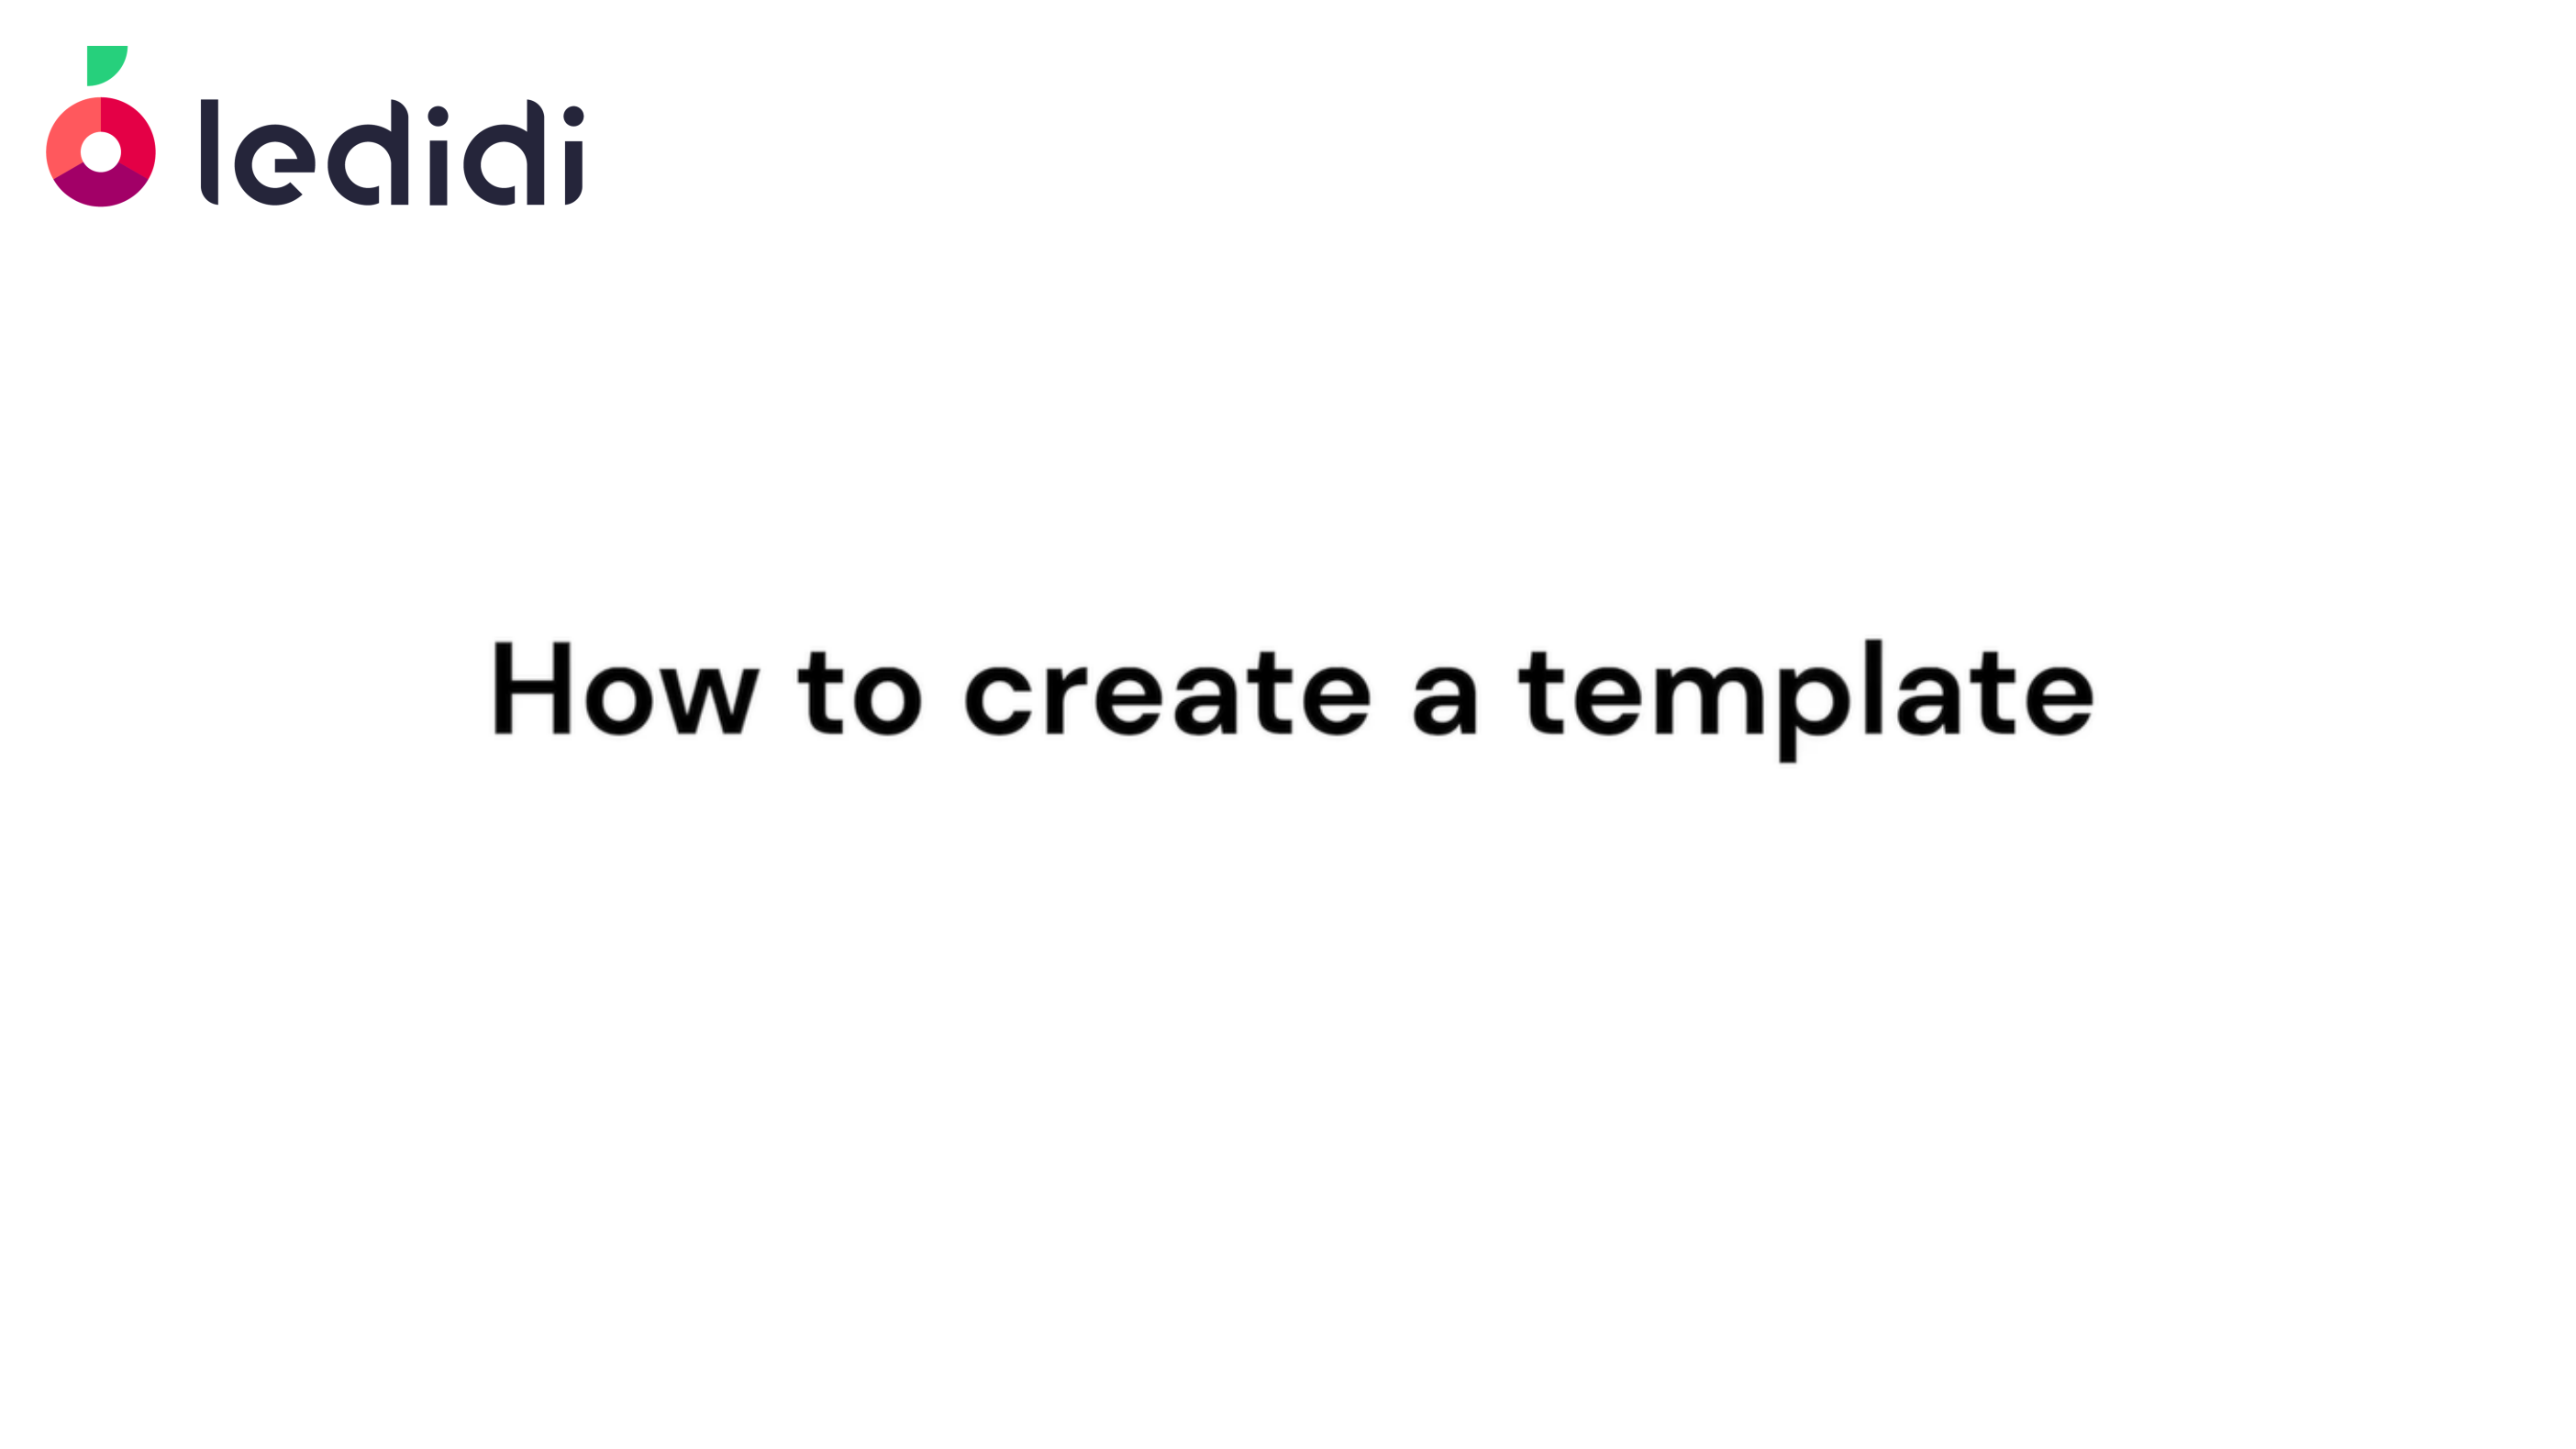 How to create a template